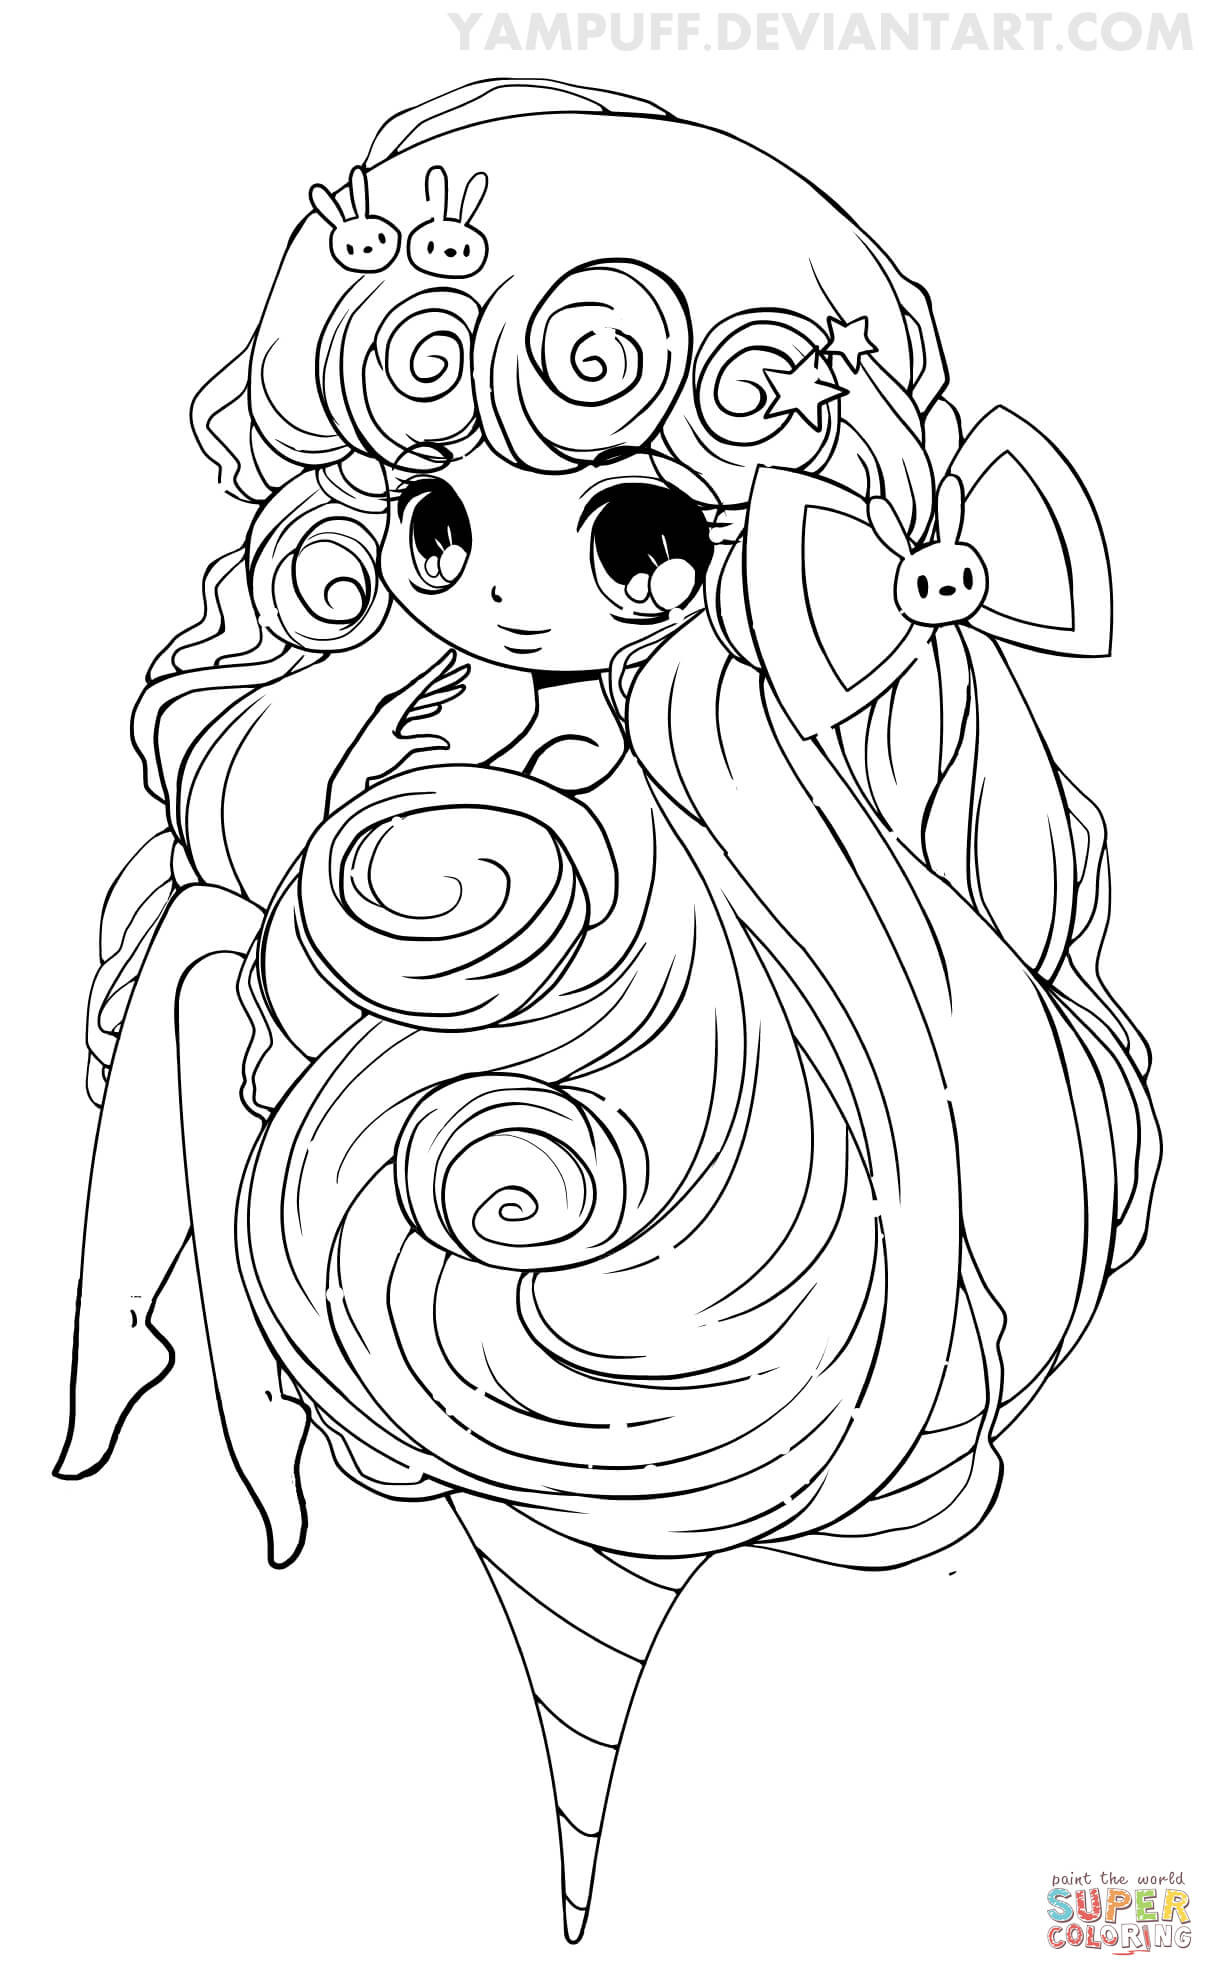 Chibi Anime Girl Coloring Pages
 Chibi Cotton Candy Girl coloring page